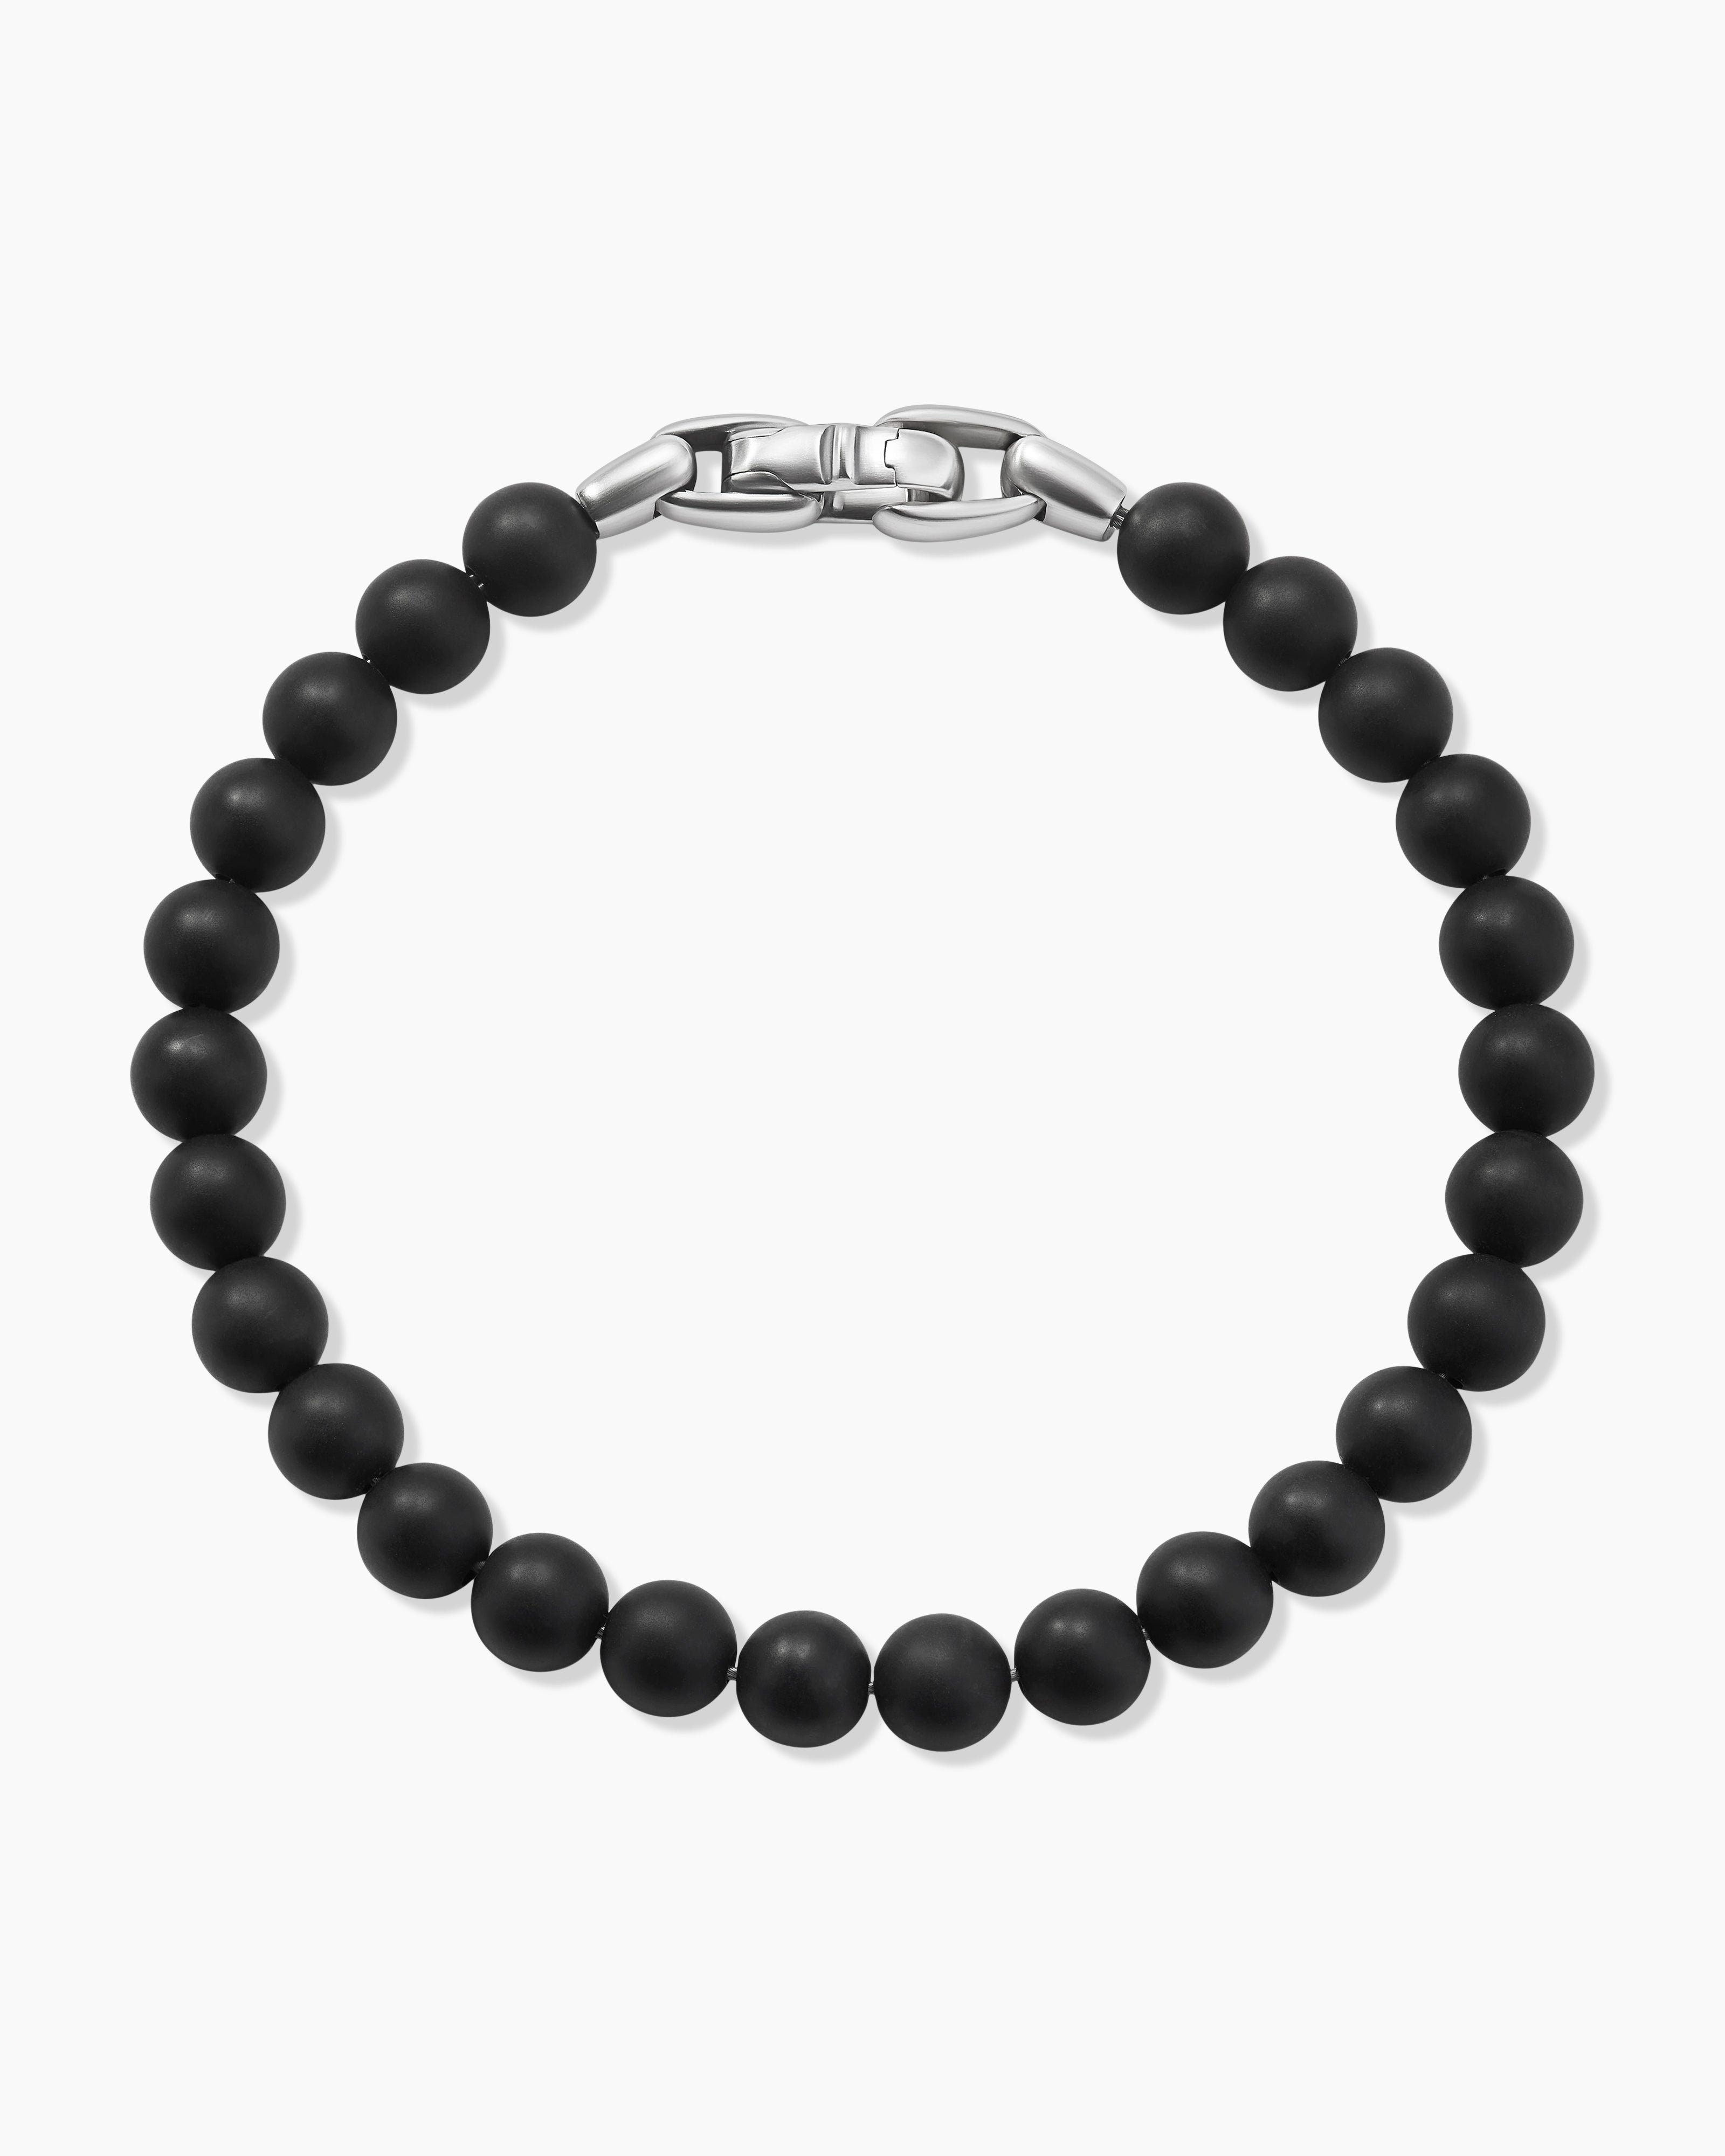 Men's Black Onyx Beaded Bracelet with Sterling Silver Clasp